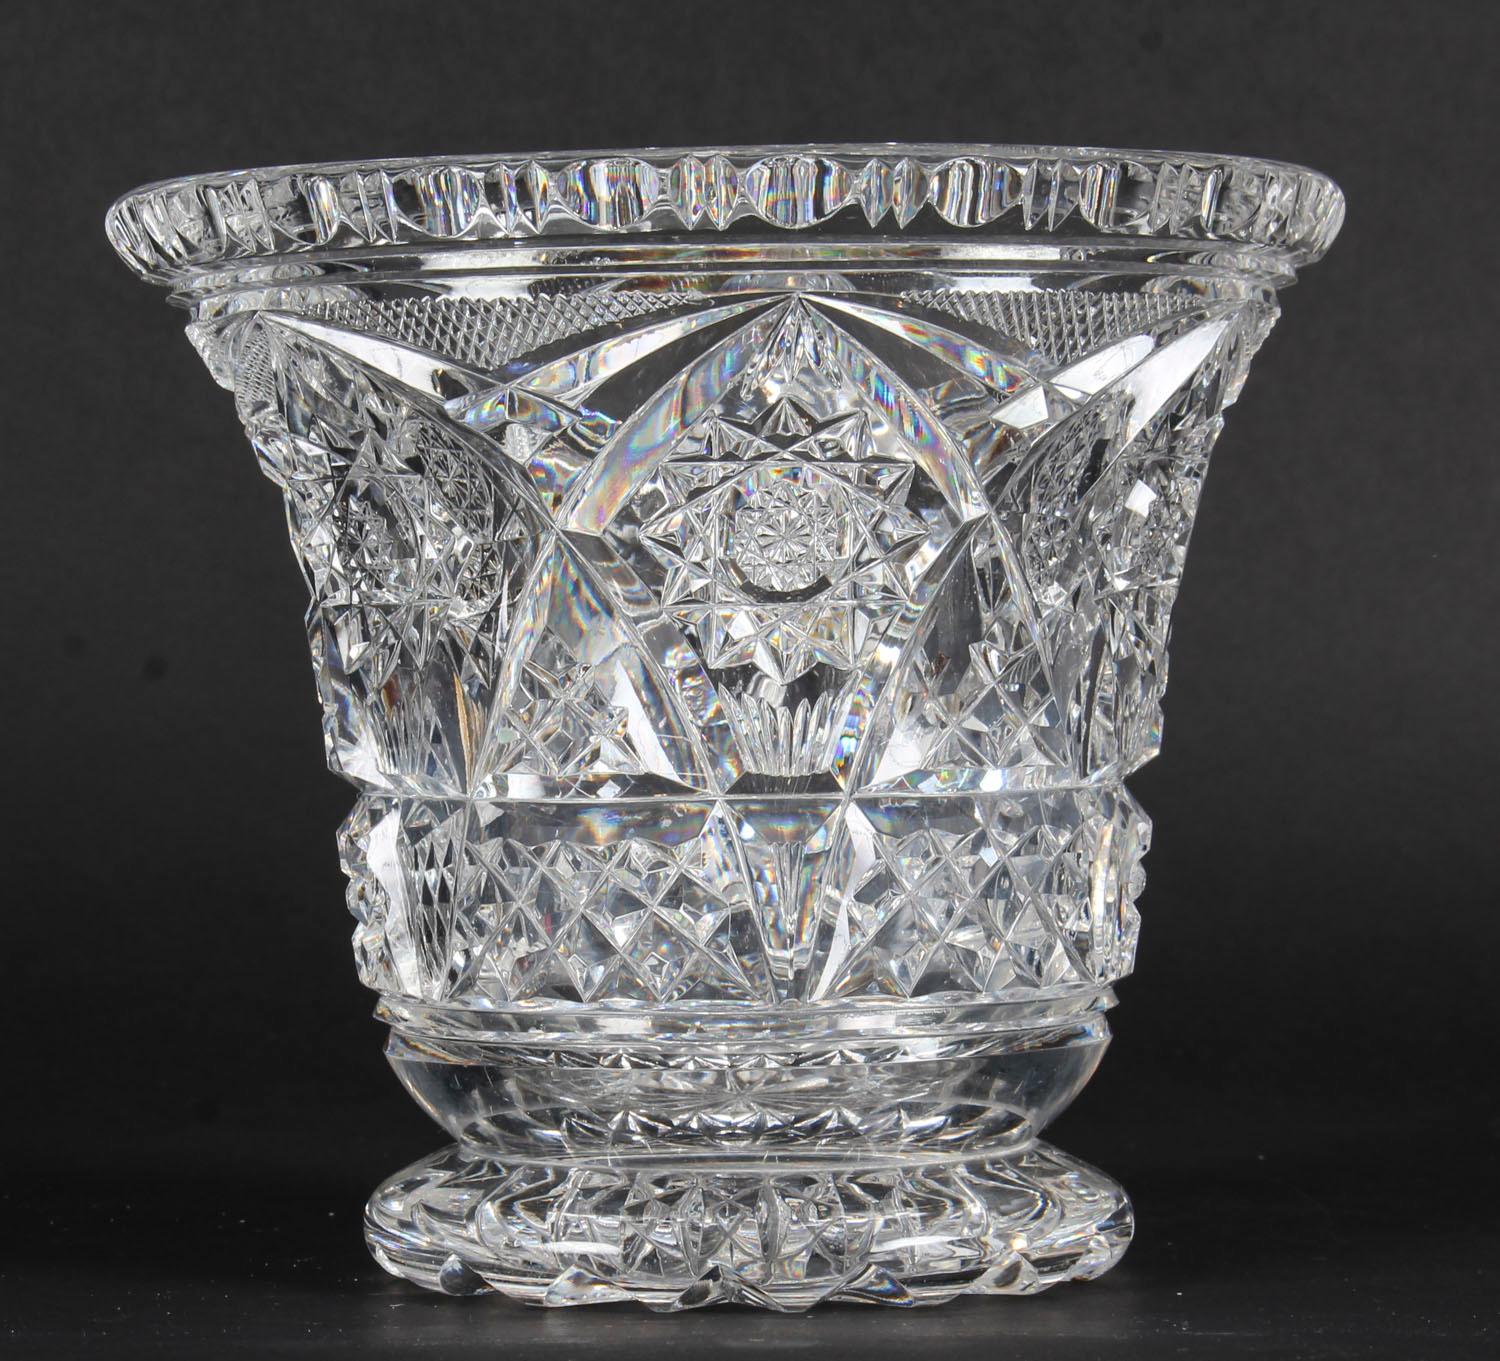 A thoroughly delightful superb quality vintage cut crystal glass vase dating from the mid-20th century.

Condition:
In excellent condition, please see photos for confirmation.

Dimensions in cm:
Height 16 x width 18 x depth 18

Dimensions in